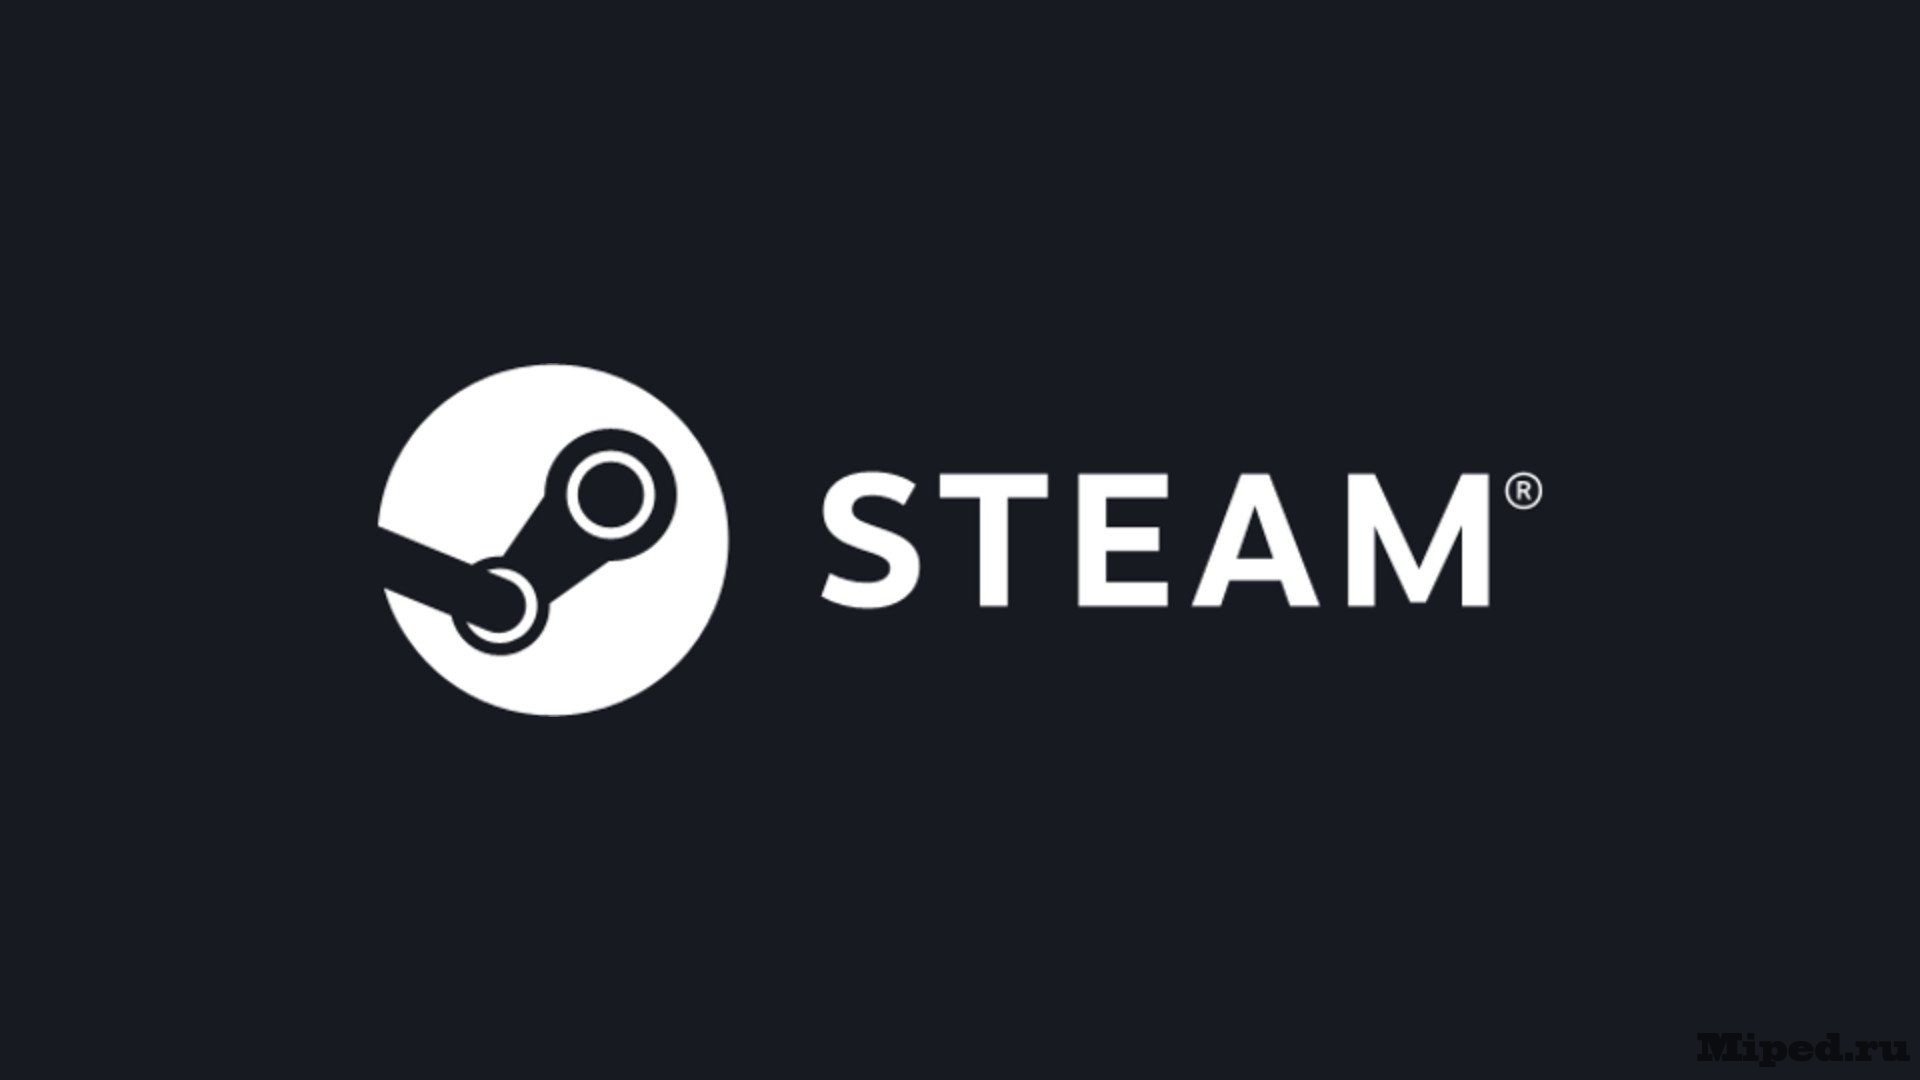 Steam stat is фото 33